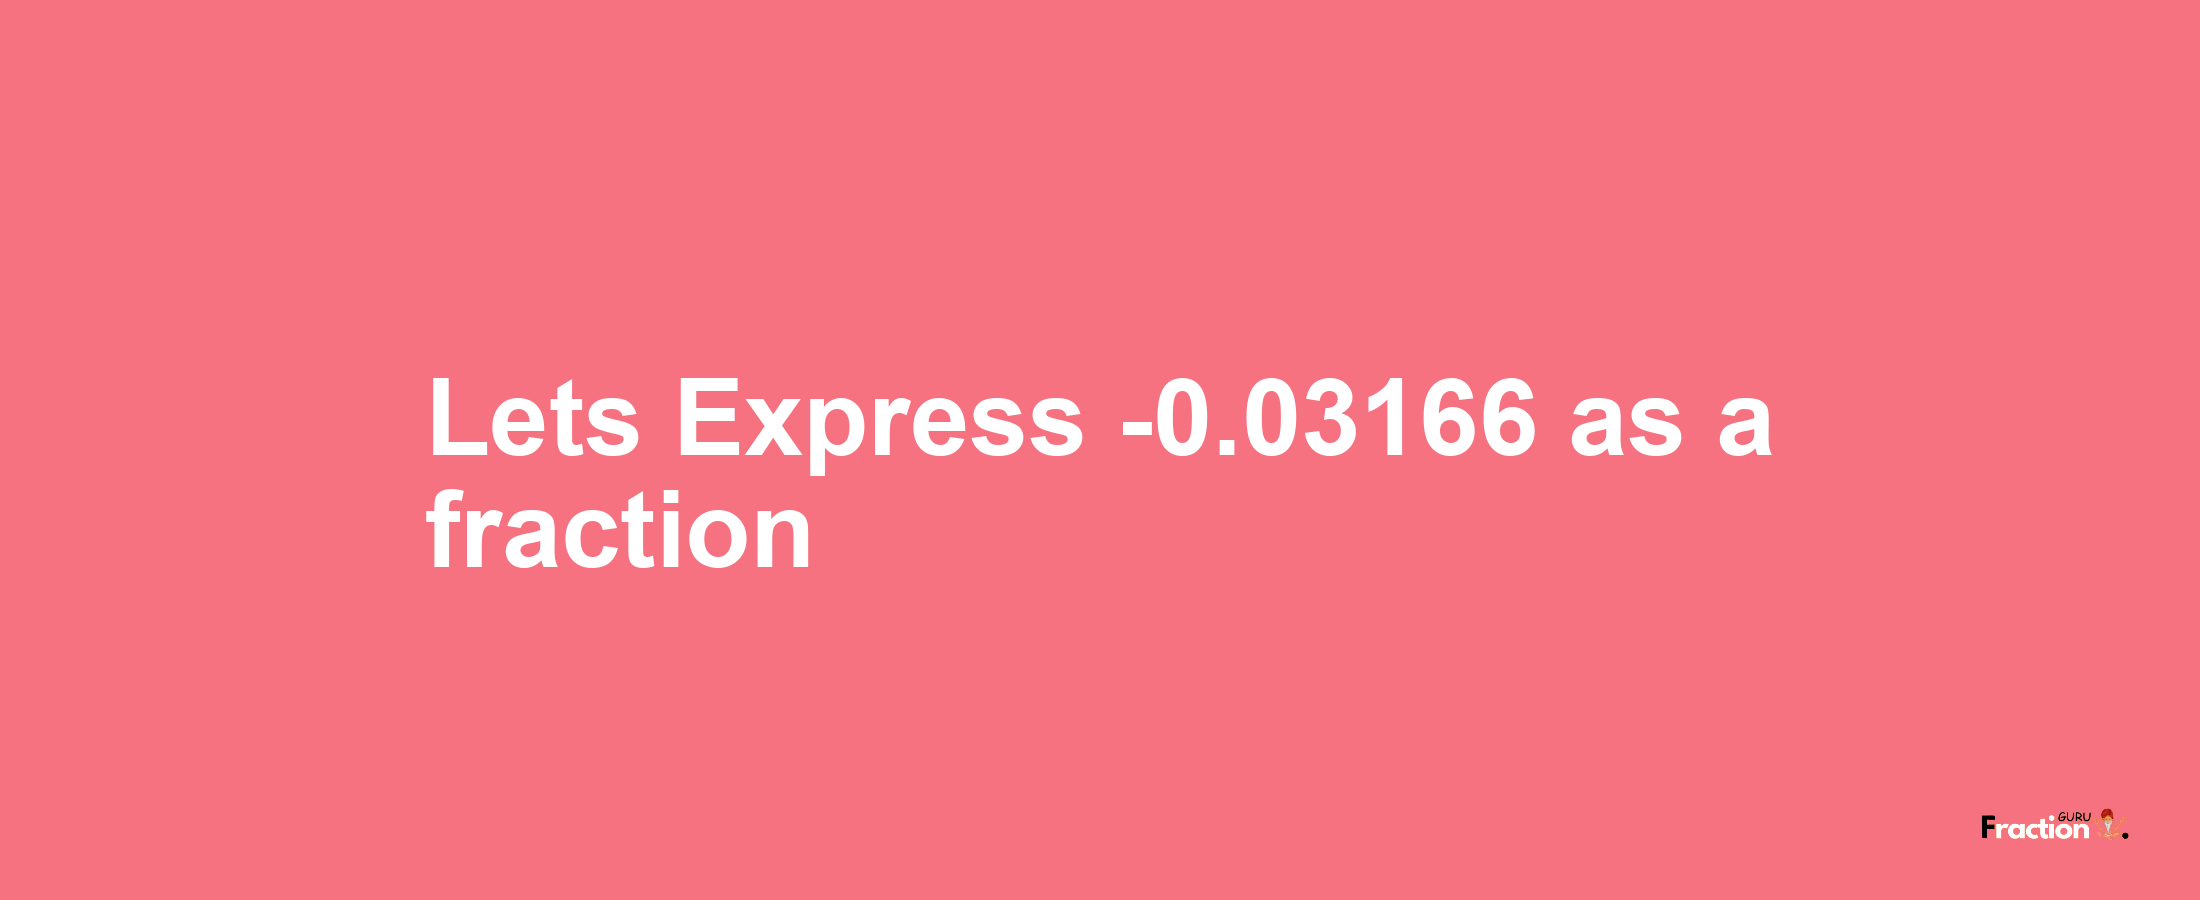 Lets Express -0.03166 as afraction